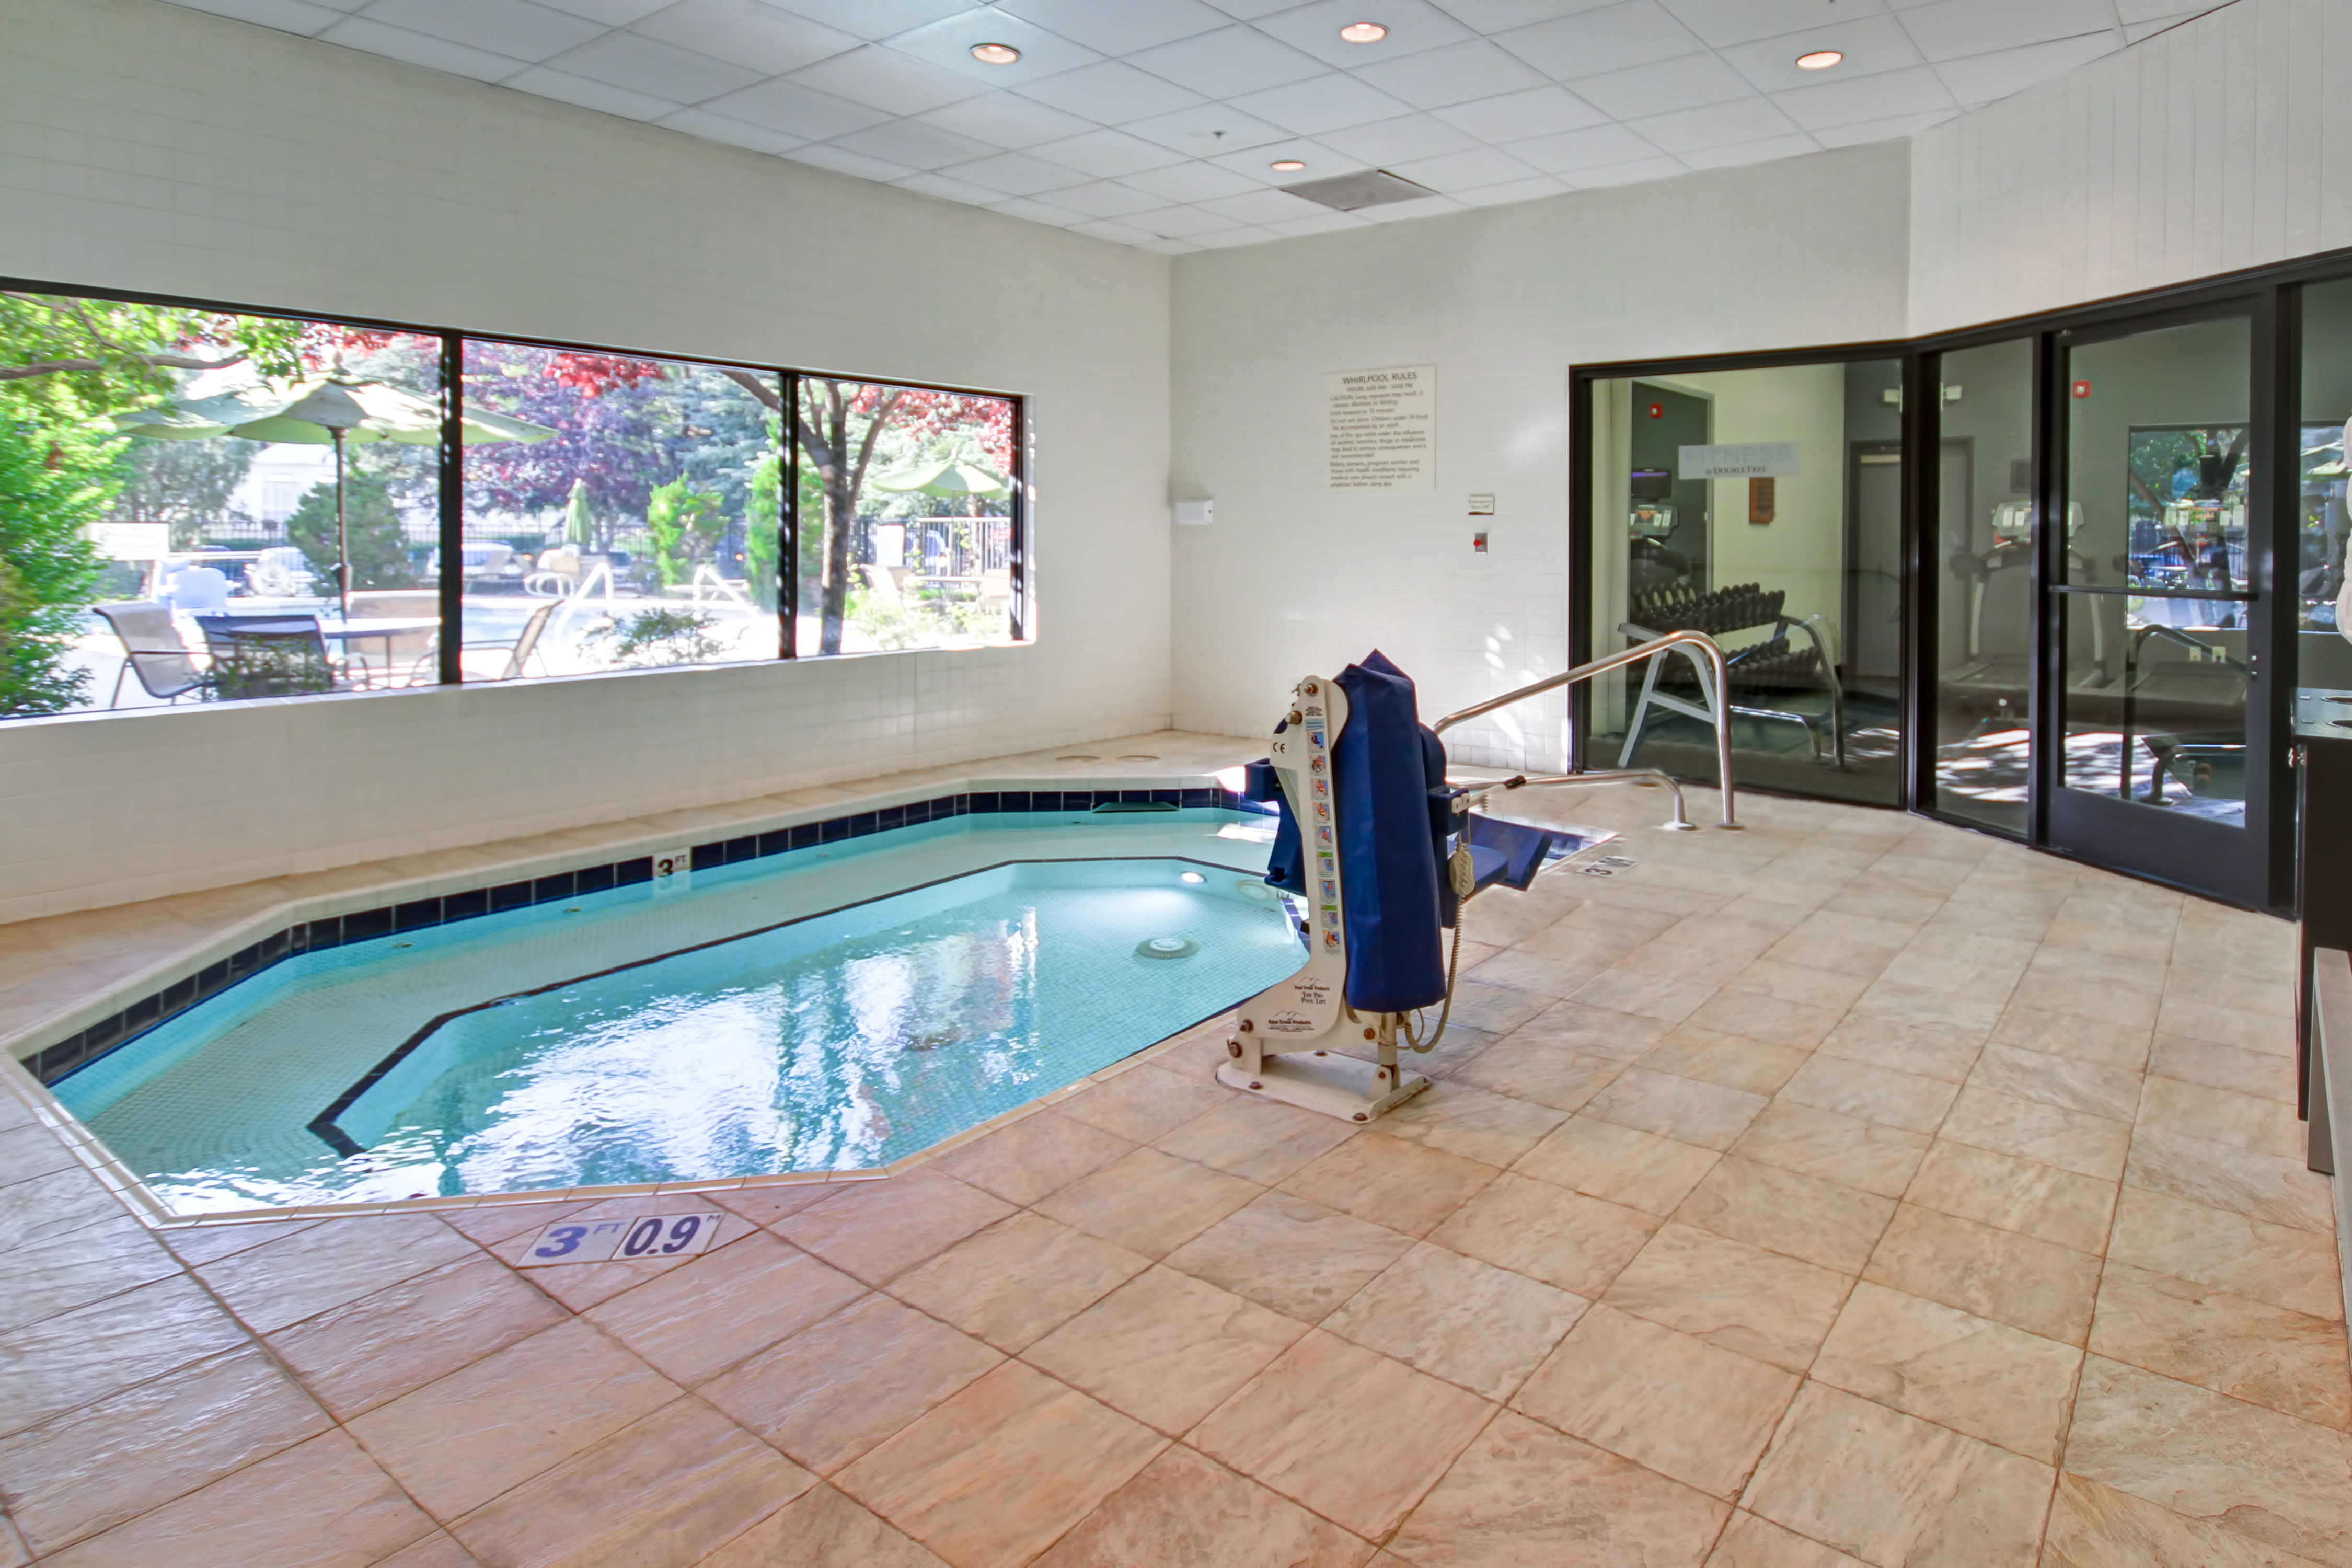 Indoor Whirlpool Spa By Large Window With Patio View and Glass Door With View Into Fitness Center